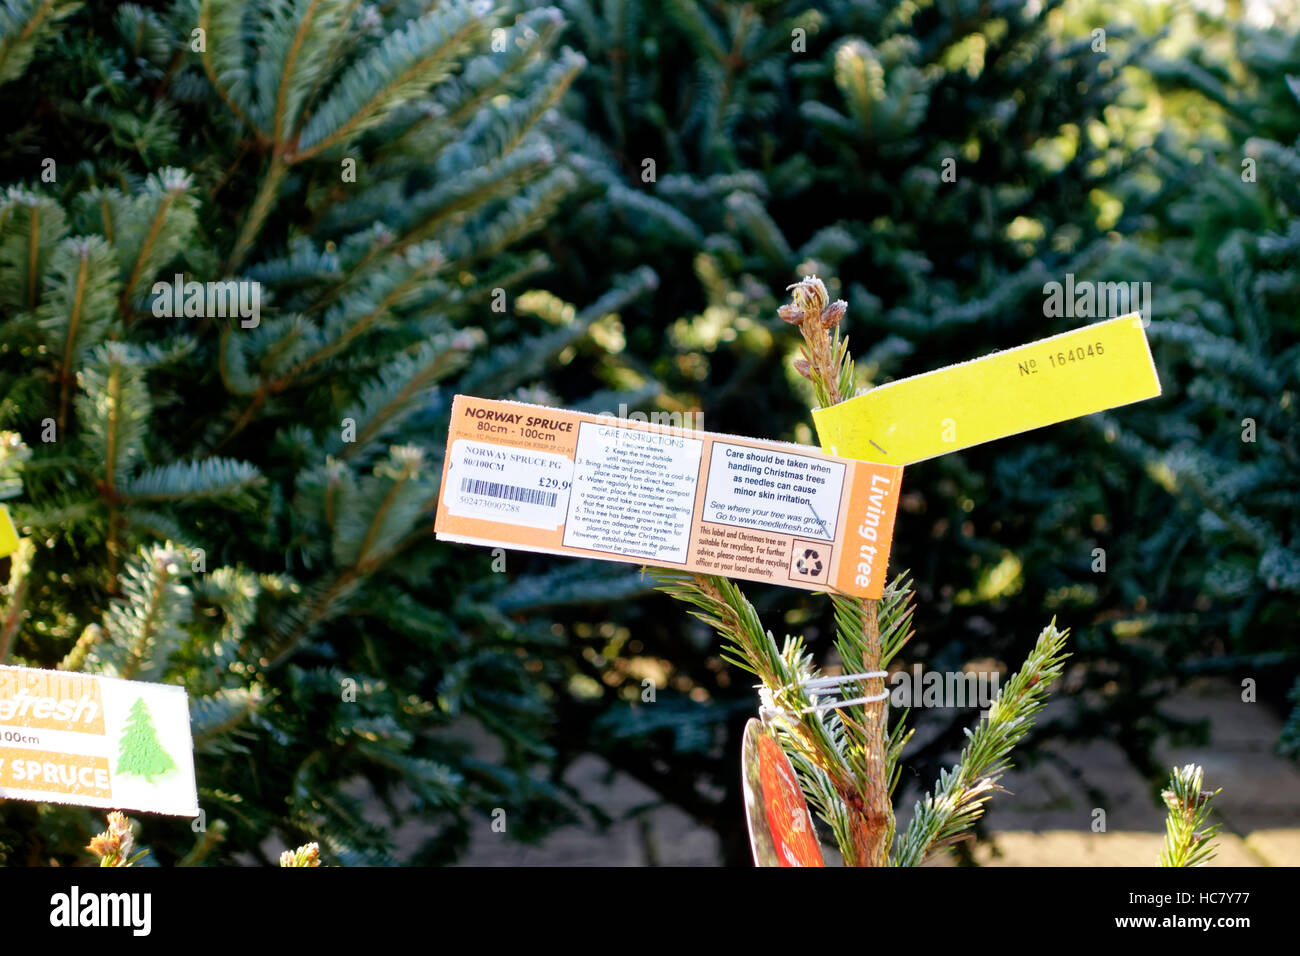 Norway Spruce Christmas Trees For Sale at Whitehall Garden Centre near Lacock in Wiltshire, United Kingdom. Stock Photo